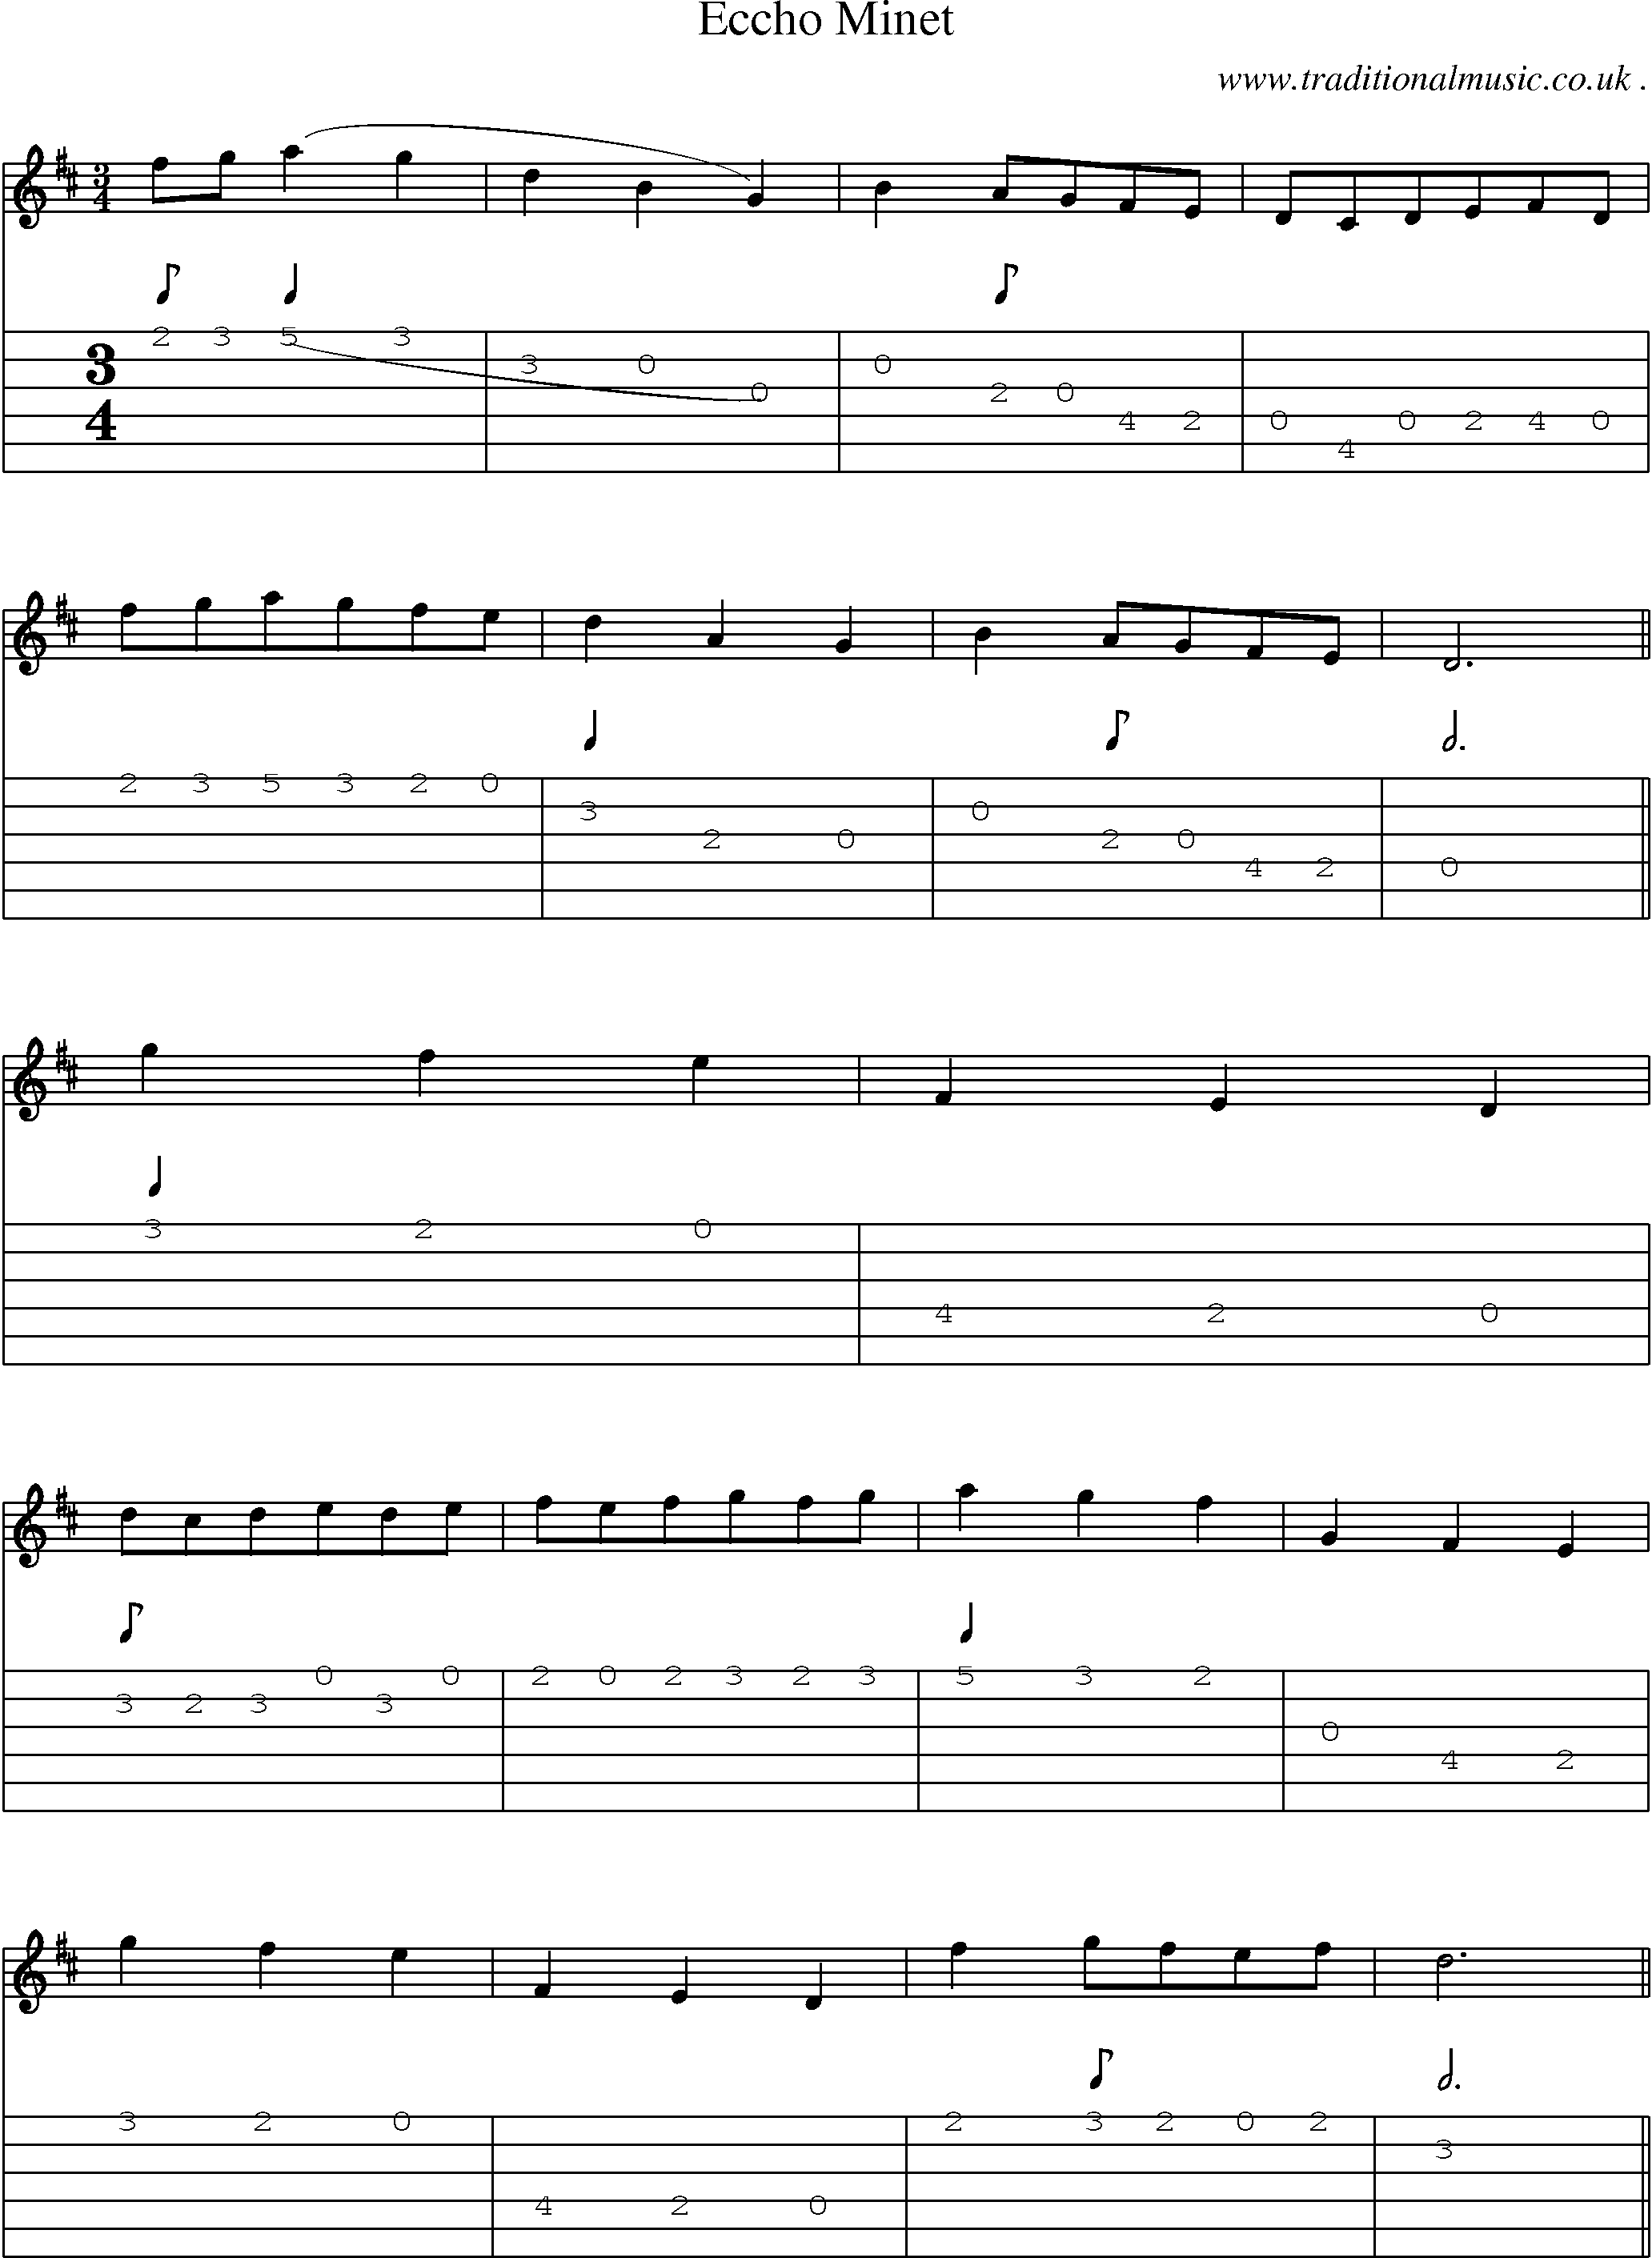 Sheet-Music and Guitar Tabs for Eccho Minet